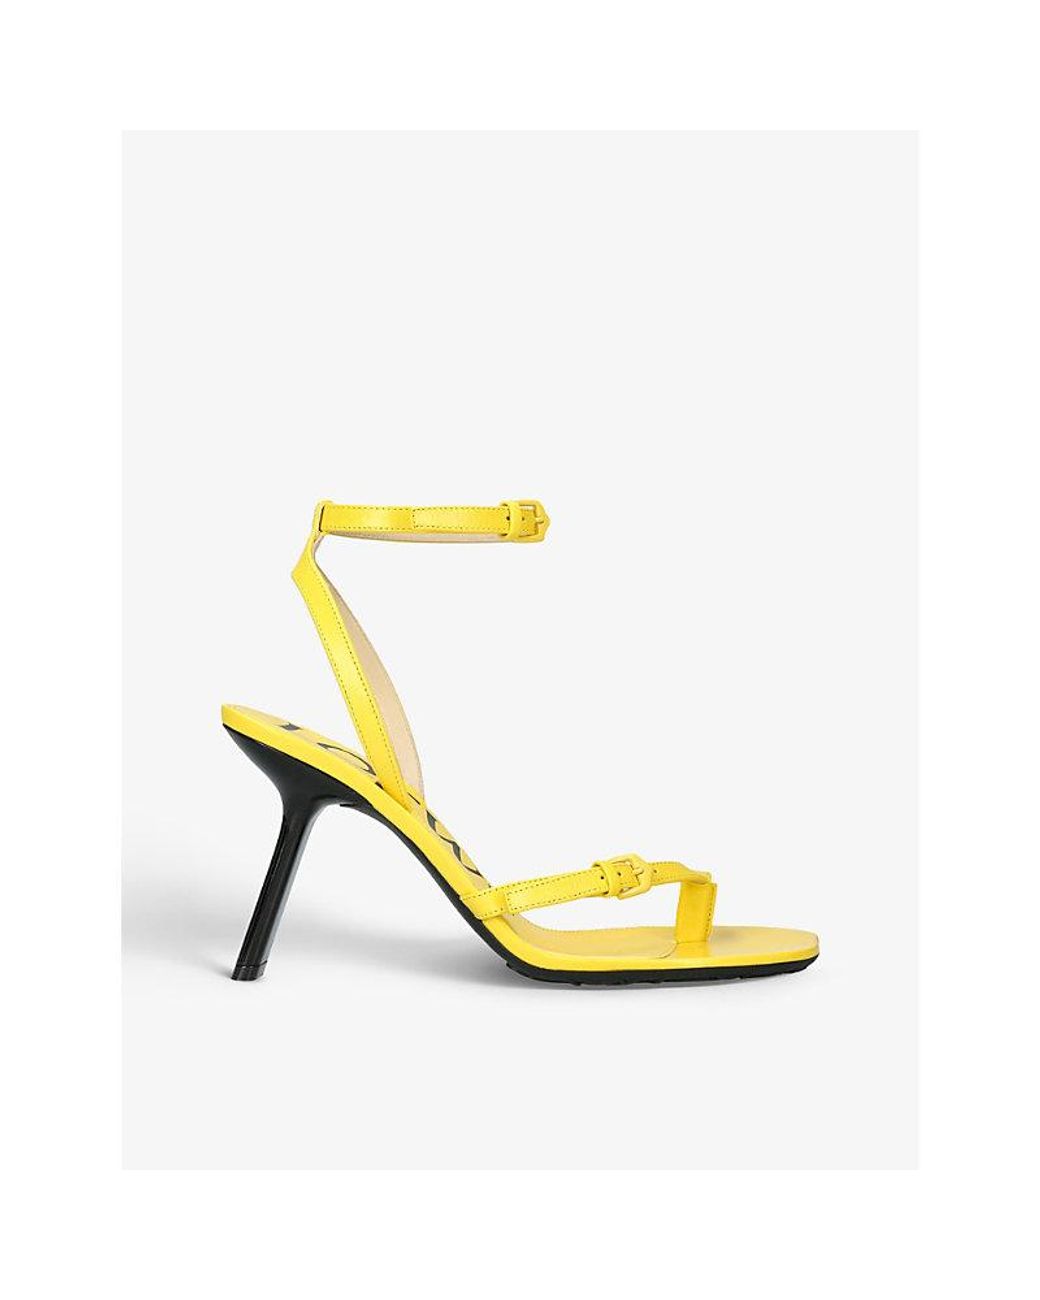 Loewe Petal Leather Heeled Sandals in Yellow | Lyst